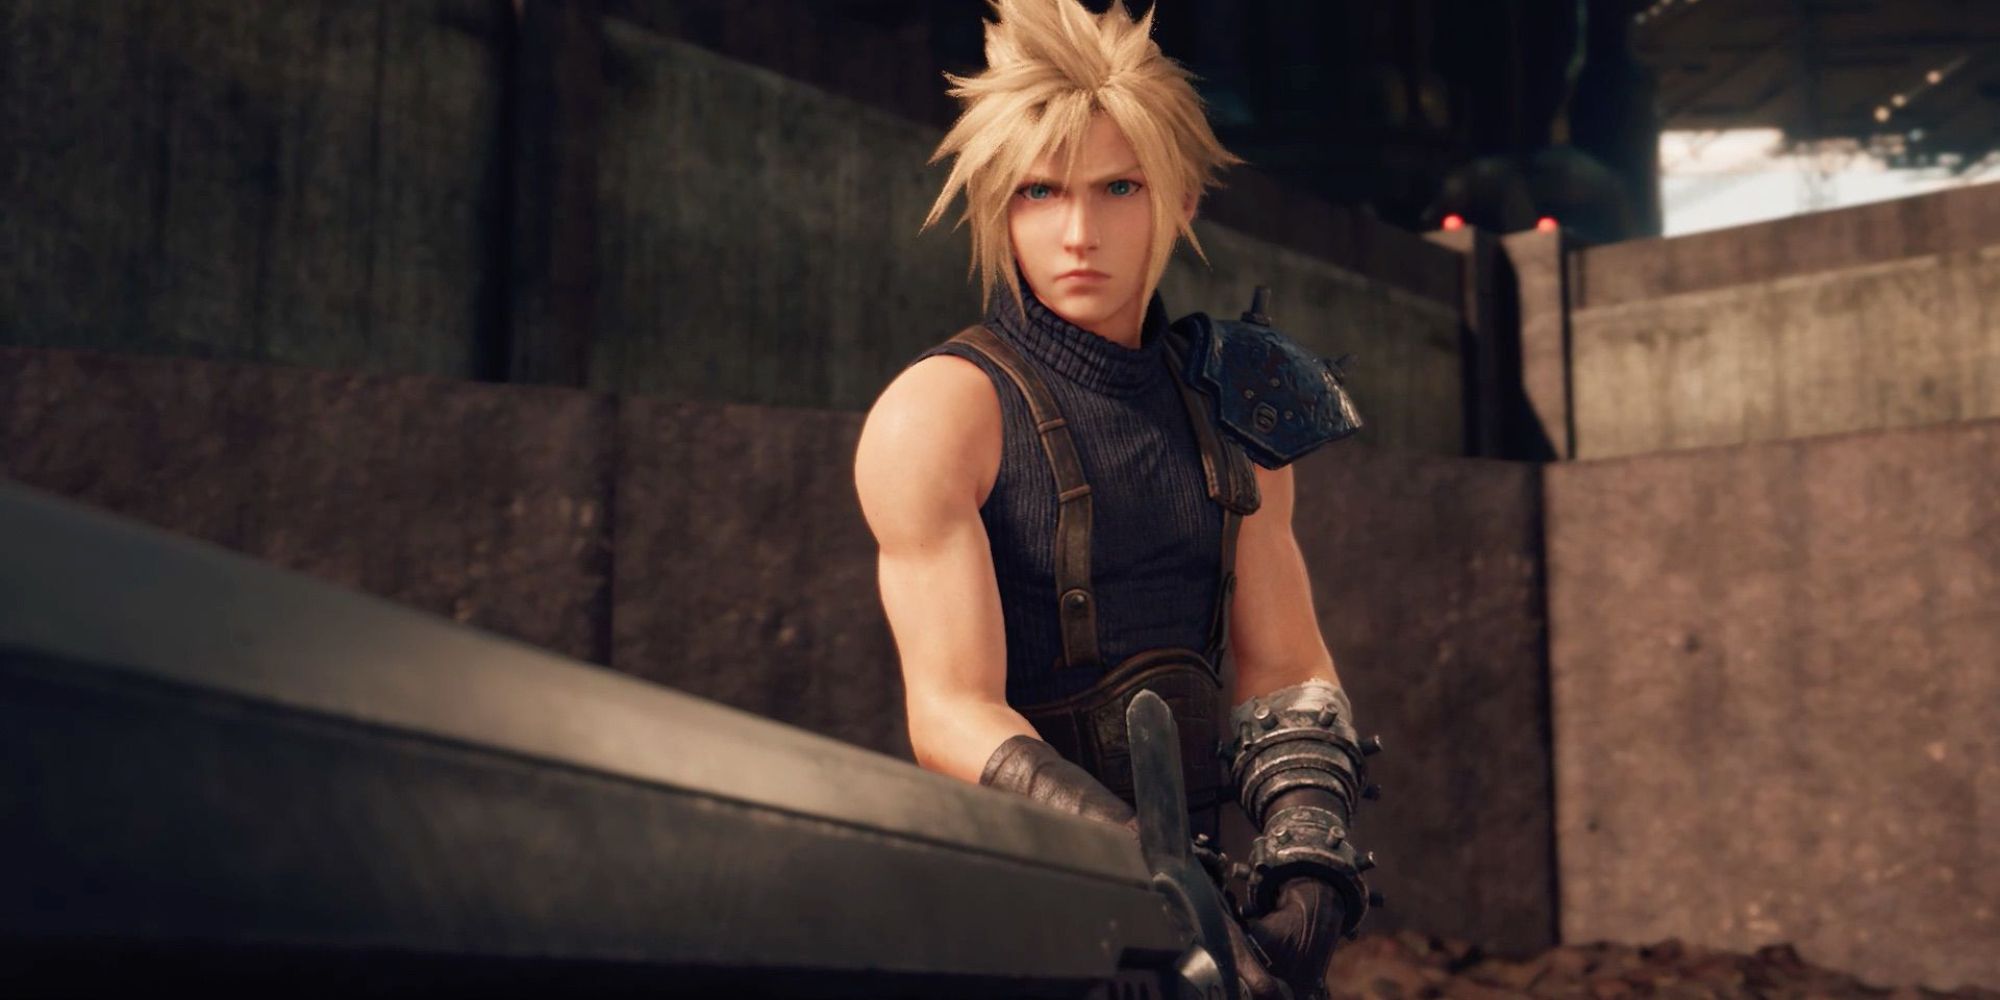 Final Fantasy 7 Rebirth is Remake supercharged